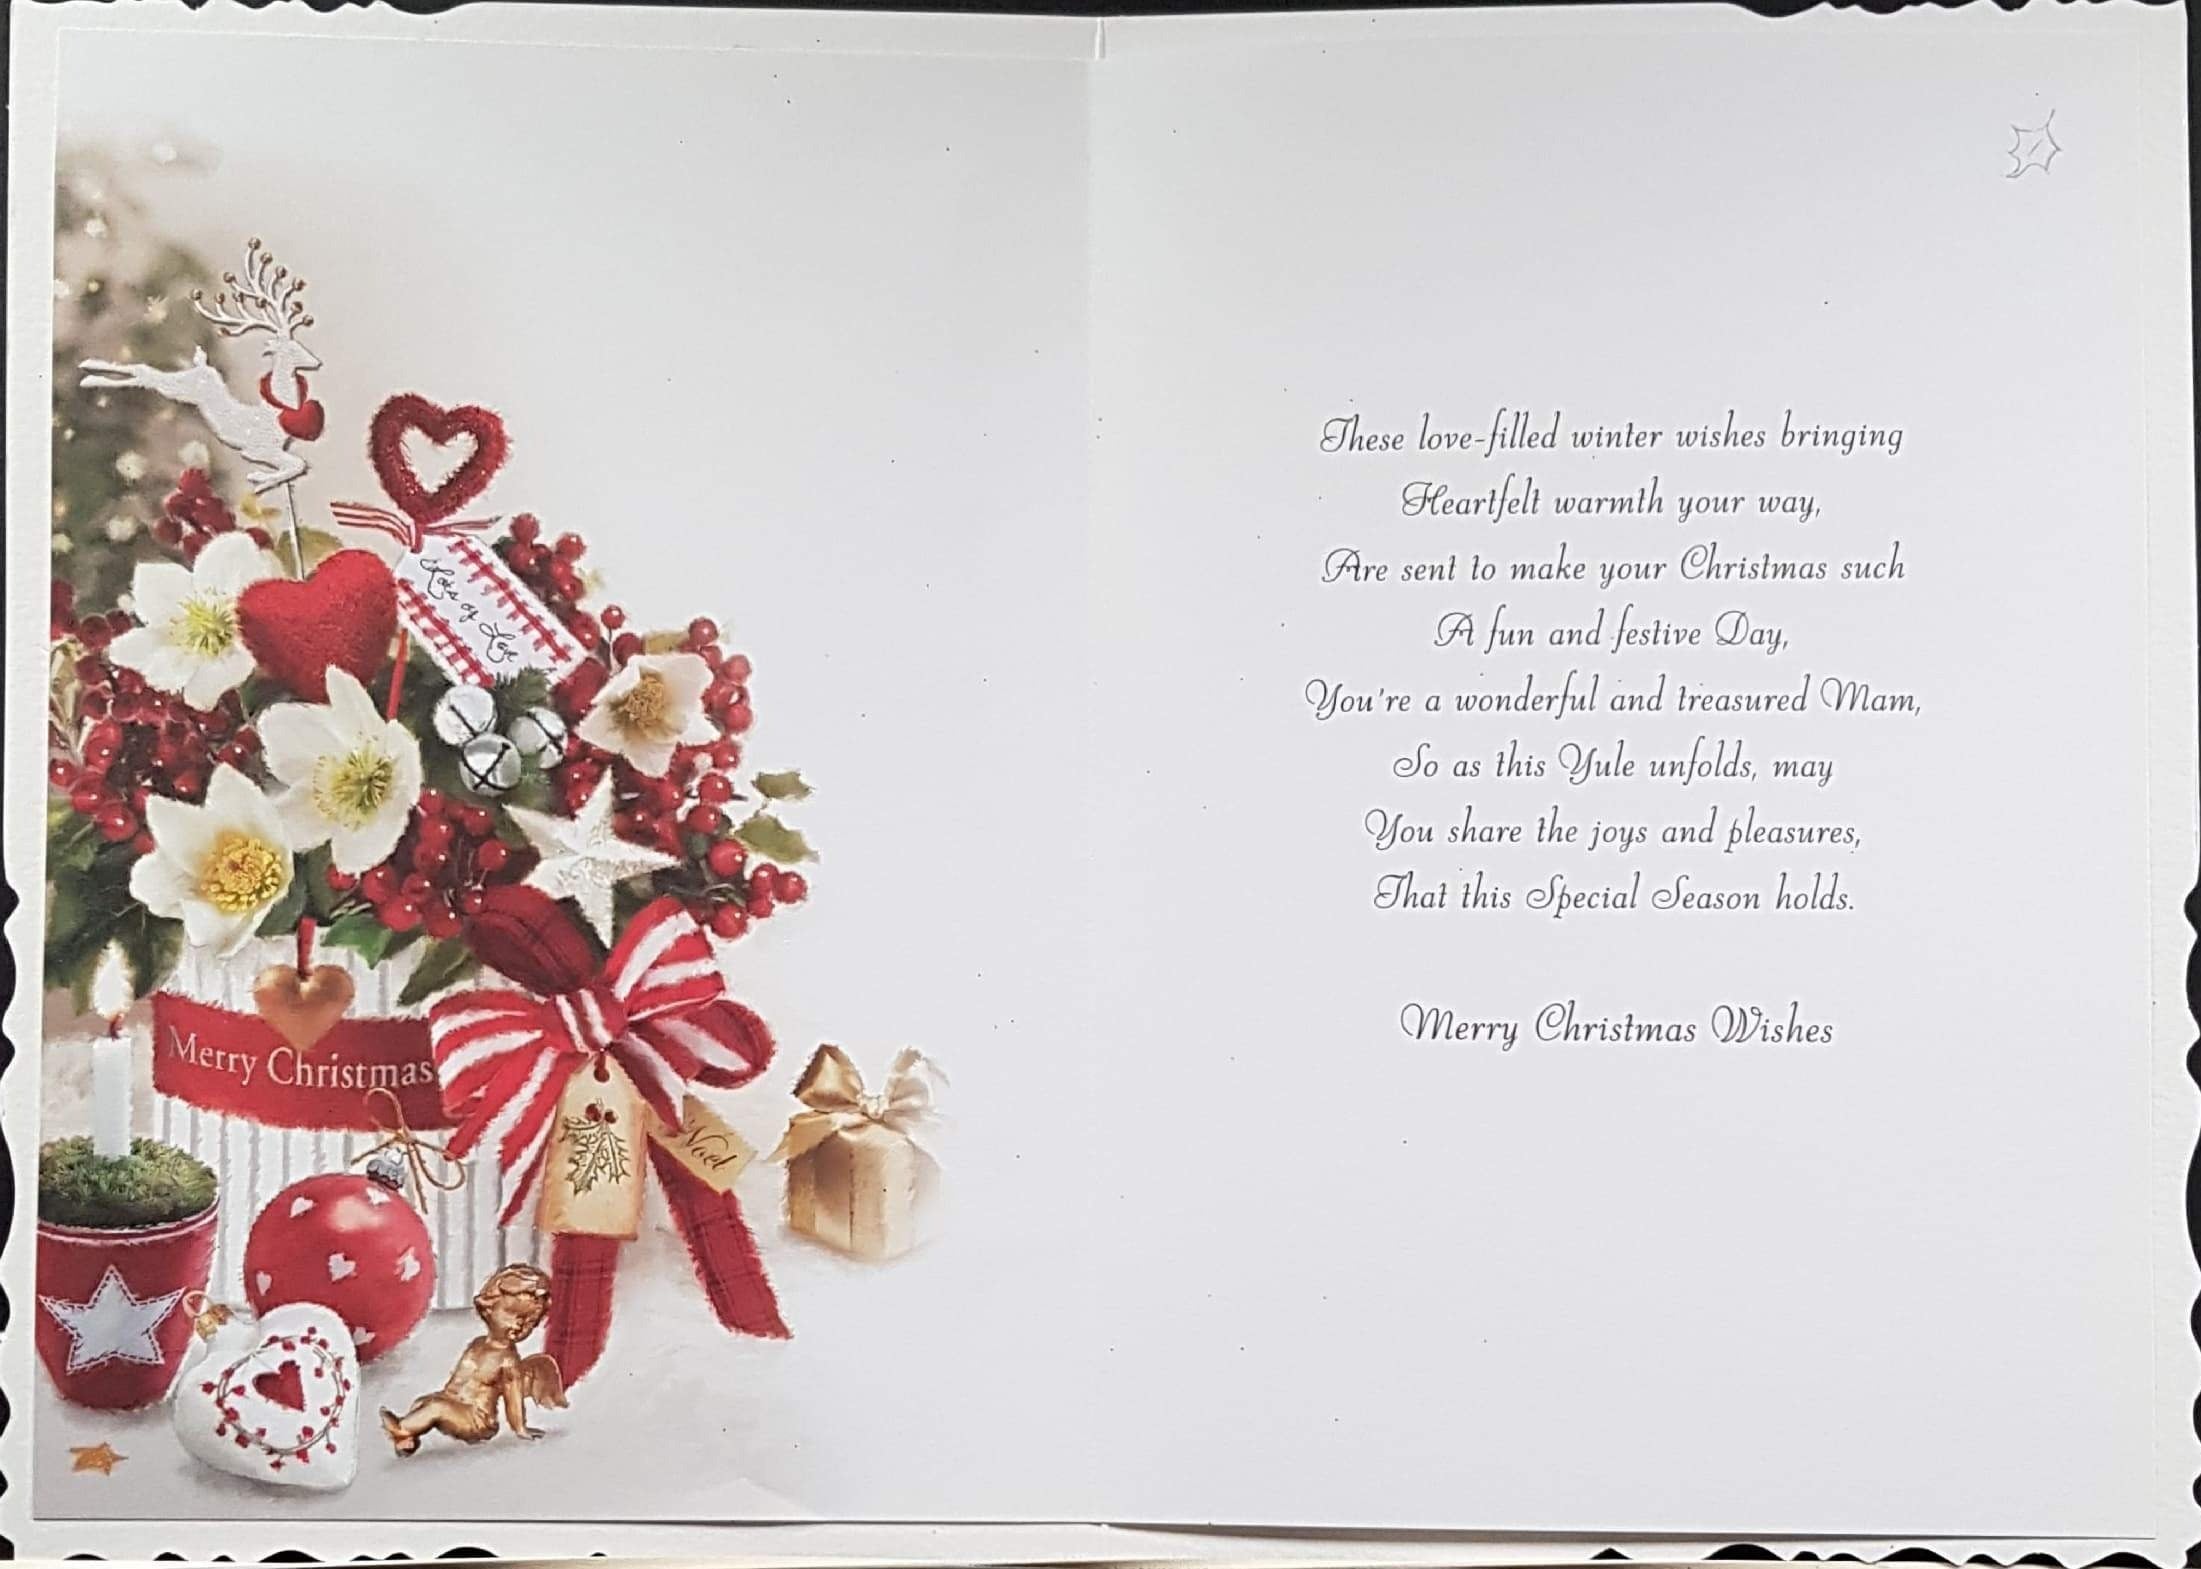 Nana Christmas Card - With Love at Christmas & Basket with Berries & Flowers